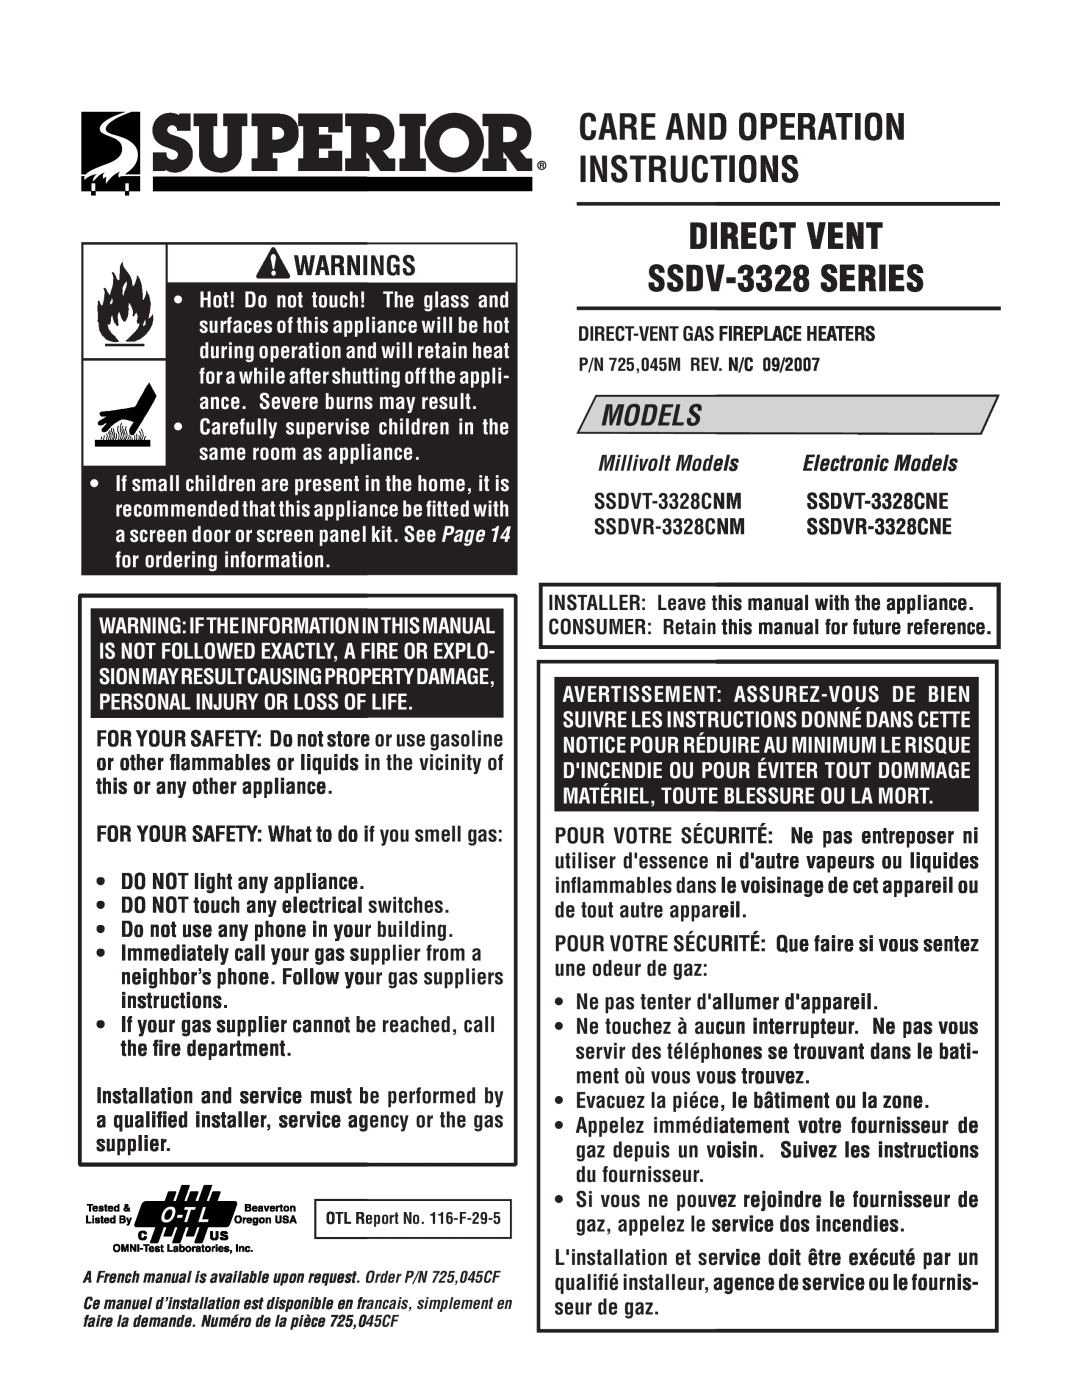 Superior SSDVT-3328CNM manual care and operation instructions DIRECT VENT, SSDV-3328SERIES, Models, Warnings 